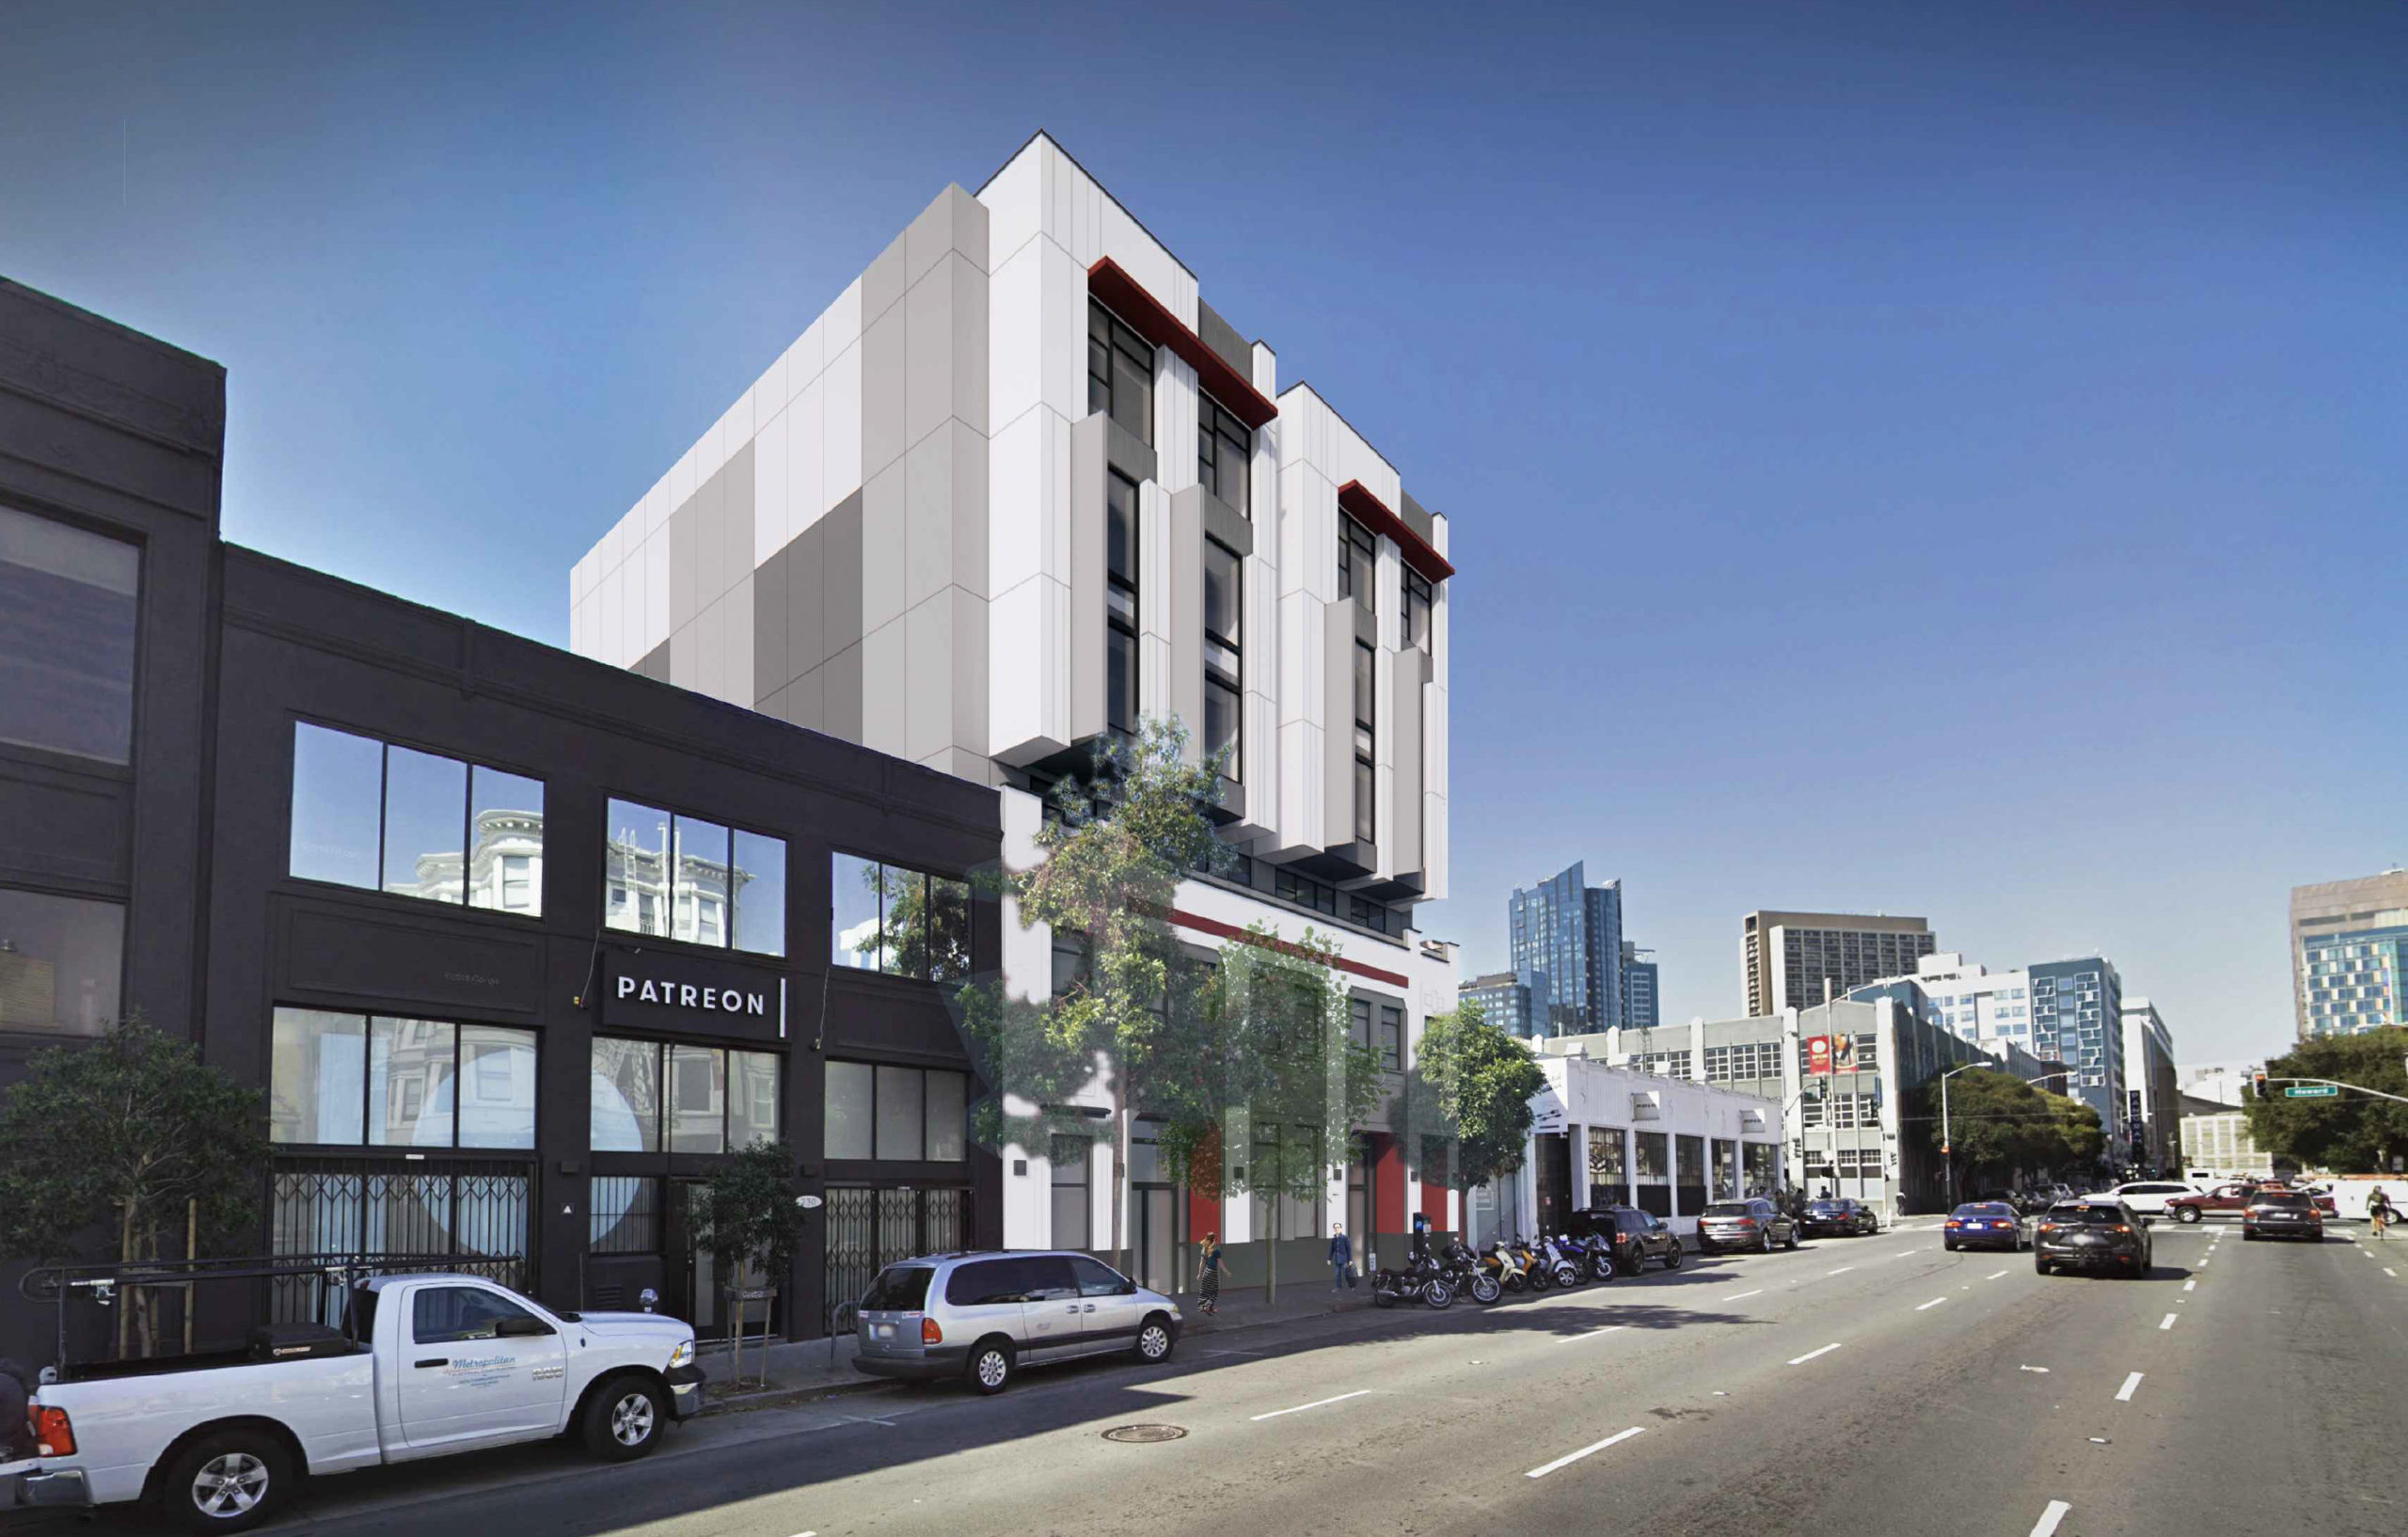 220 9th Street exterior view with Market Street-area towers visible in the background, rendering by Levy Design Partners